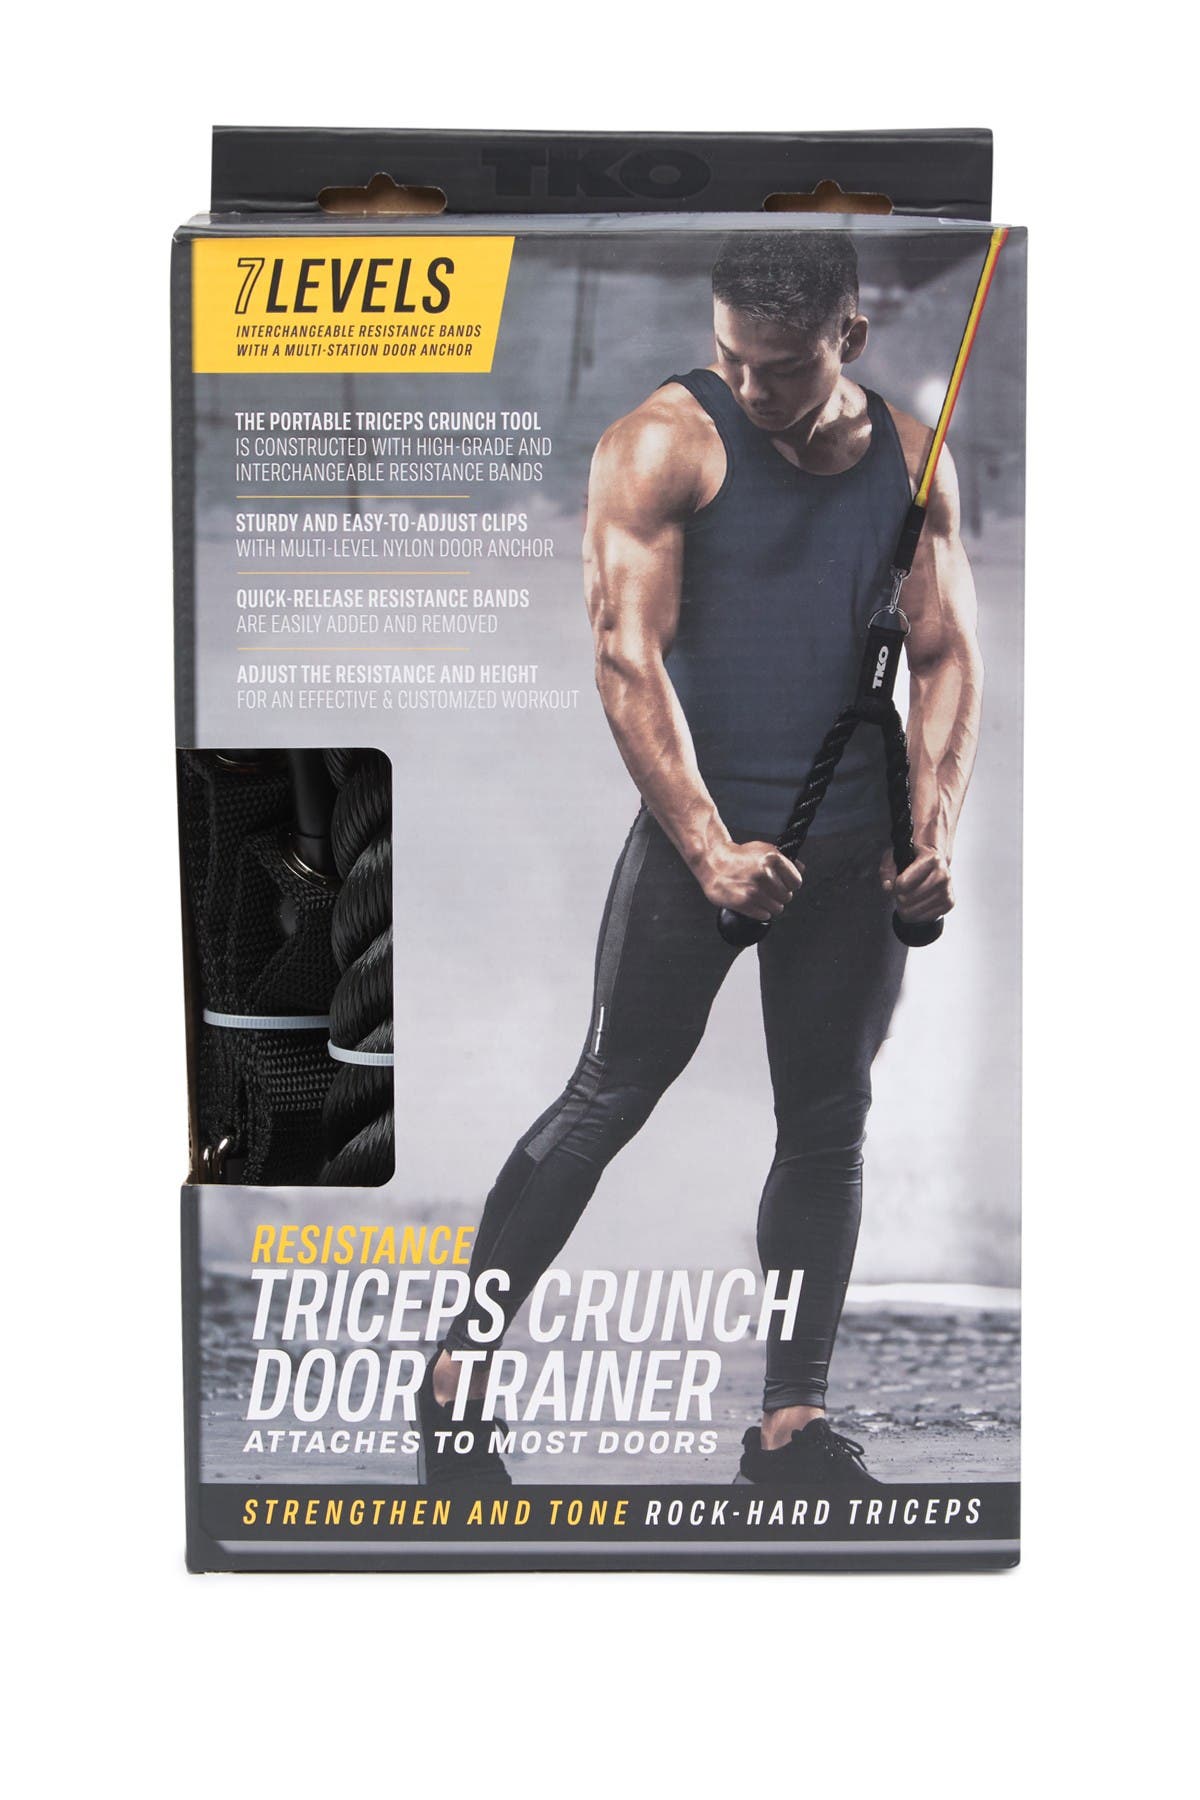 TKO Triceps Crunch - Strengthen and Tone Rock-Hard Triceps Levels 7 New  fitness